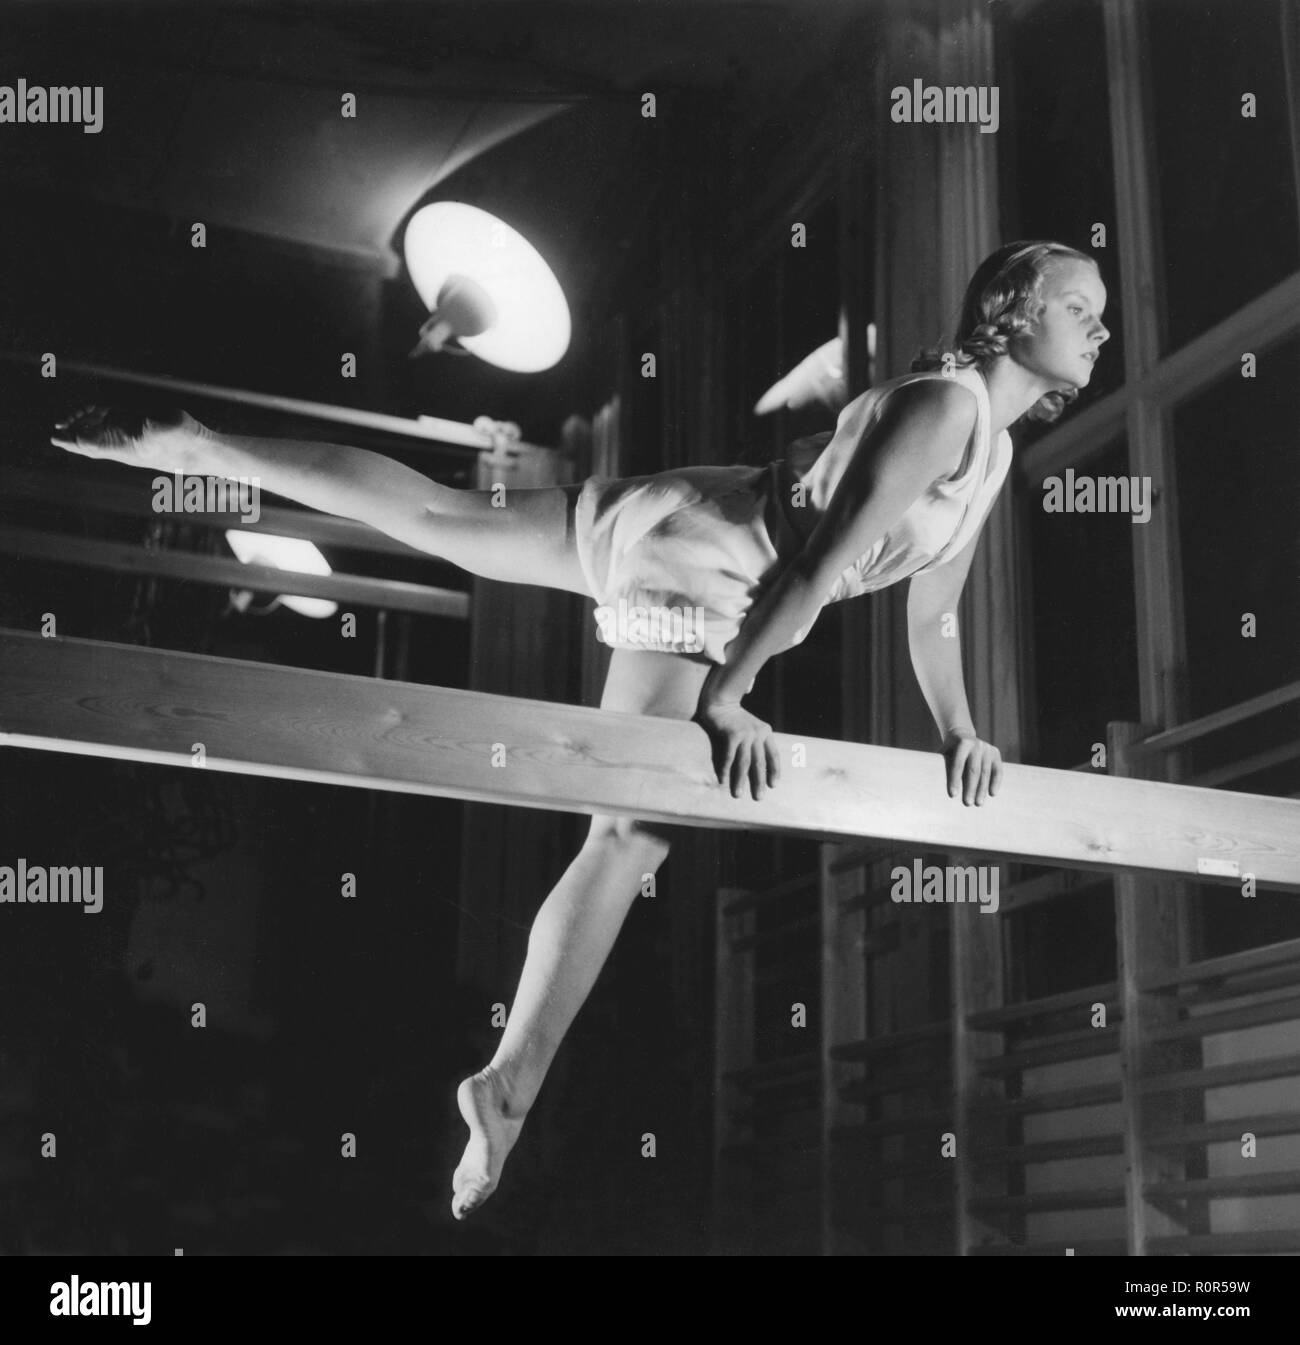 Gymnast in the 1940s. Olympic champion Göta Pettersson, 1926-1993. Pictured during training 1945. Sweden Kristoffersson ref M105-6 Stock Photo